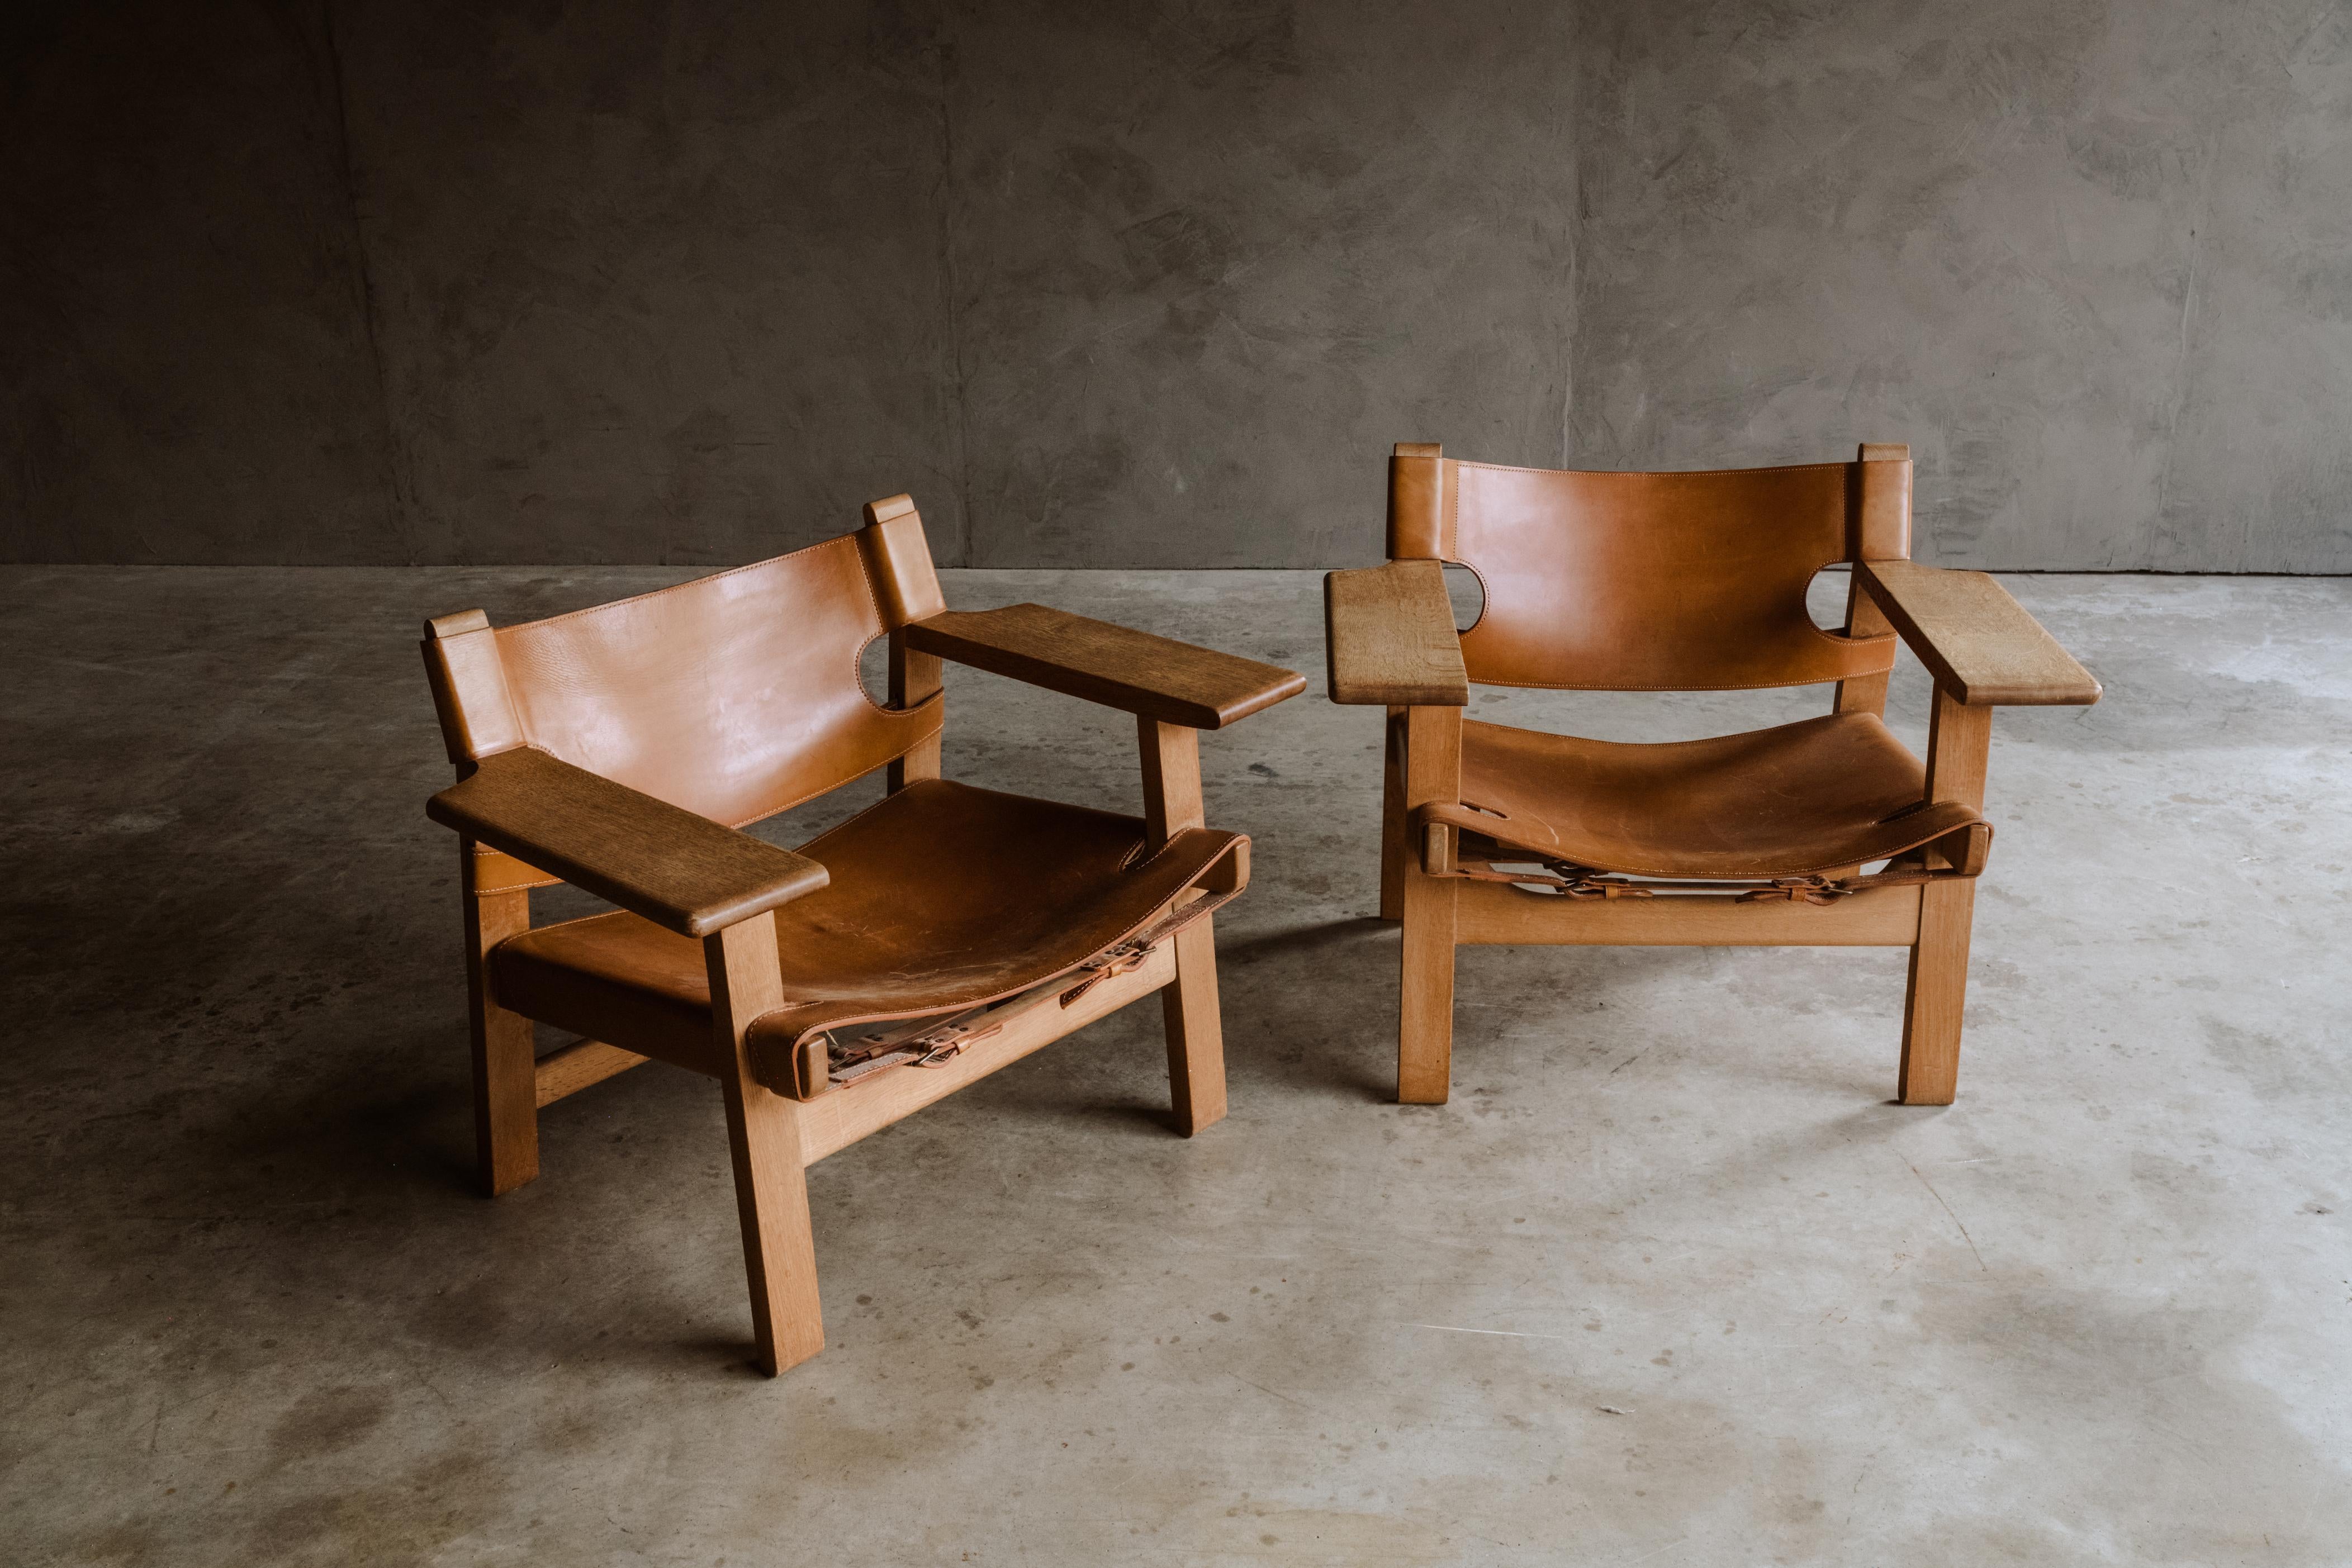 Vintage pair of Spanish chairs designed by Børge Mogensen, Denmark 1970s. Solid oak construction with original saddle leather. Produced by Fredericia Furniture, Denmark. Nice wear and patina.

We don't have the time to write an exhausting